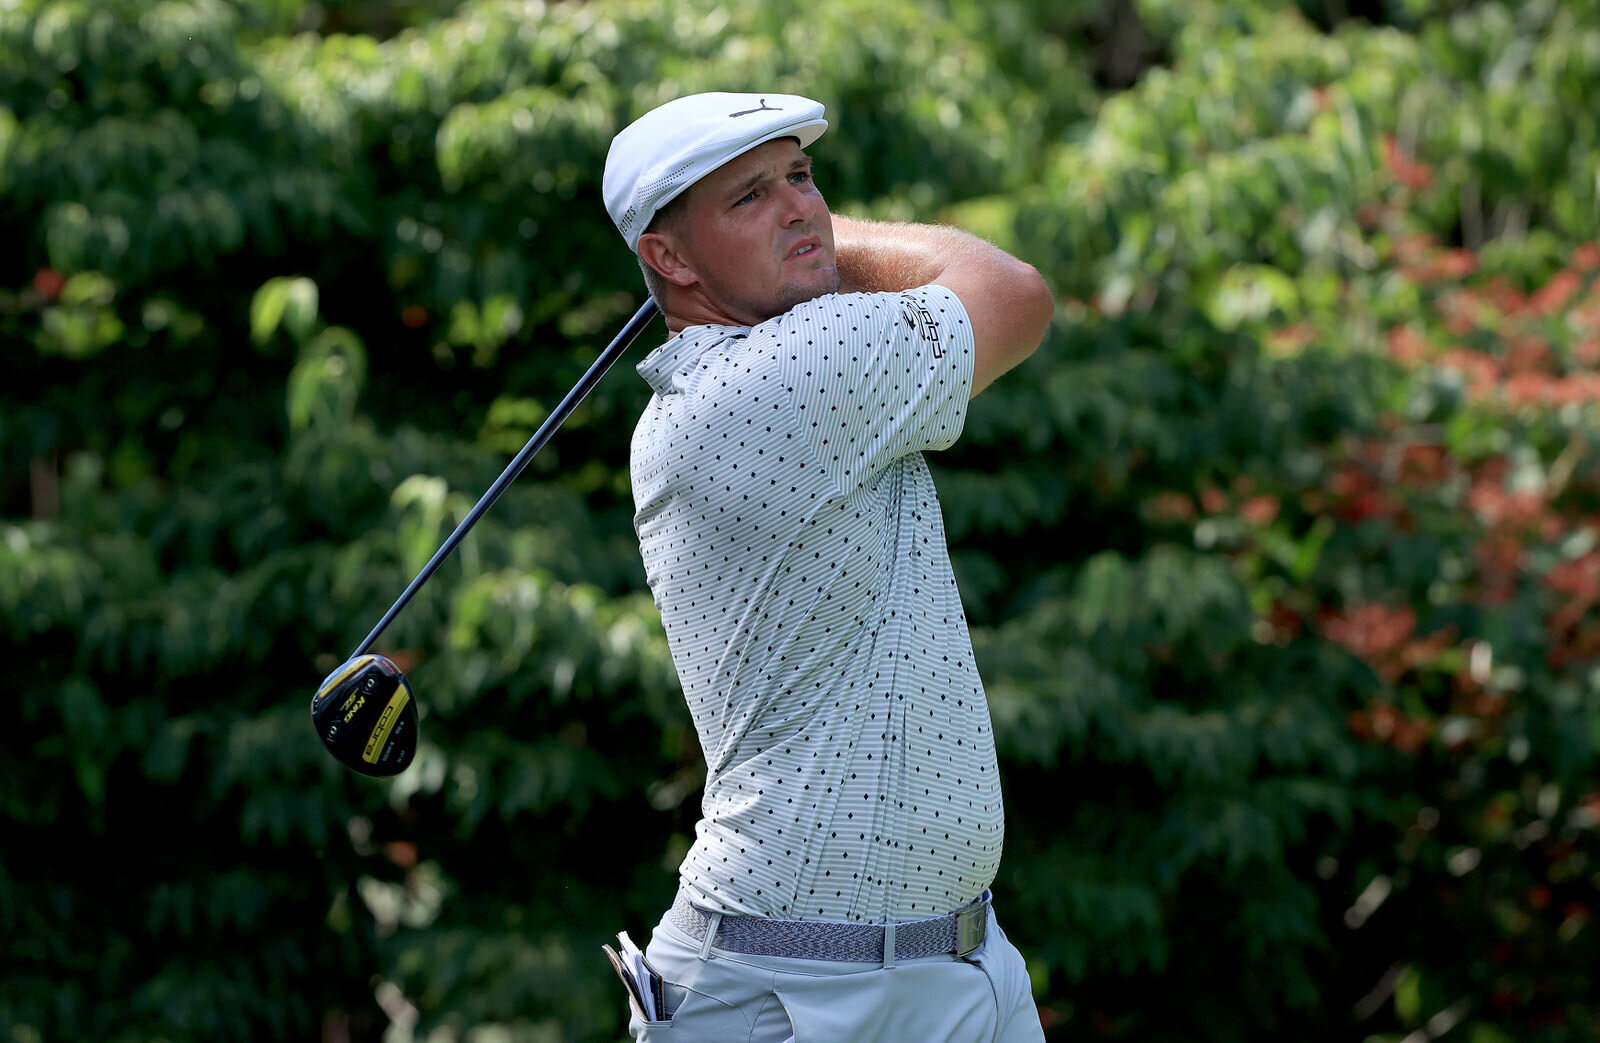  DUBLIN, OHIO - JULY 17: Bryson DeChambeau of the United States plays his shot from the 13th tee during the second round of The Memorial Tournament on July 17, 2020 at Muirfield Village Golf Club in Dublin, Ohio. (Photo by Sam Greenwood/Getty Images)